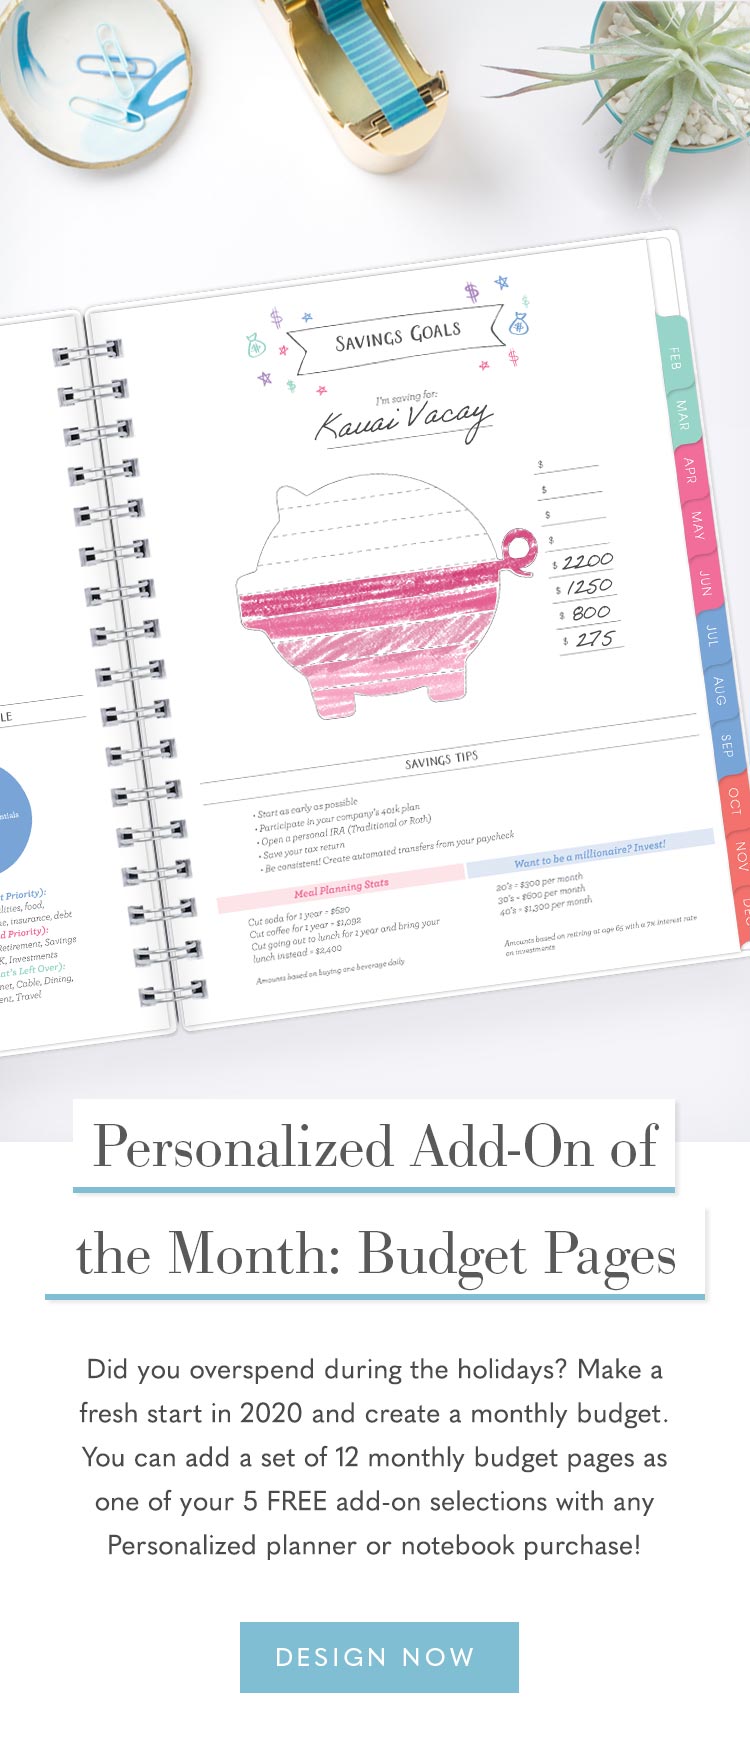 Personalized Add-On: Budget Pages